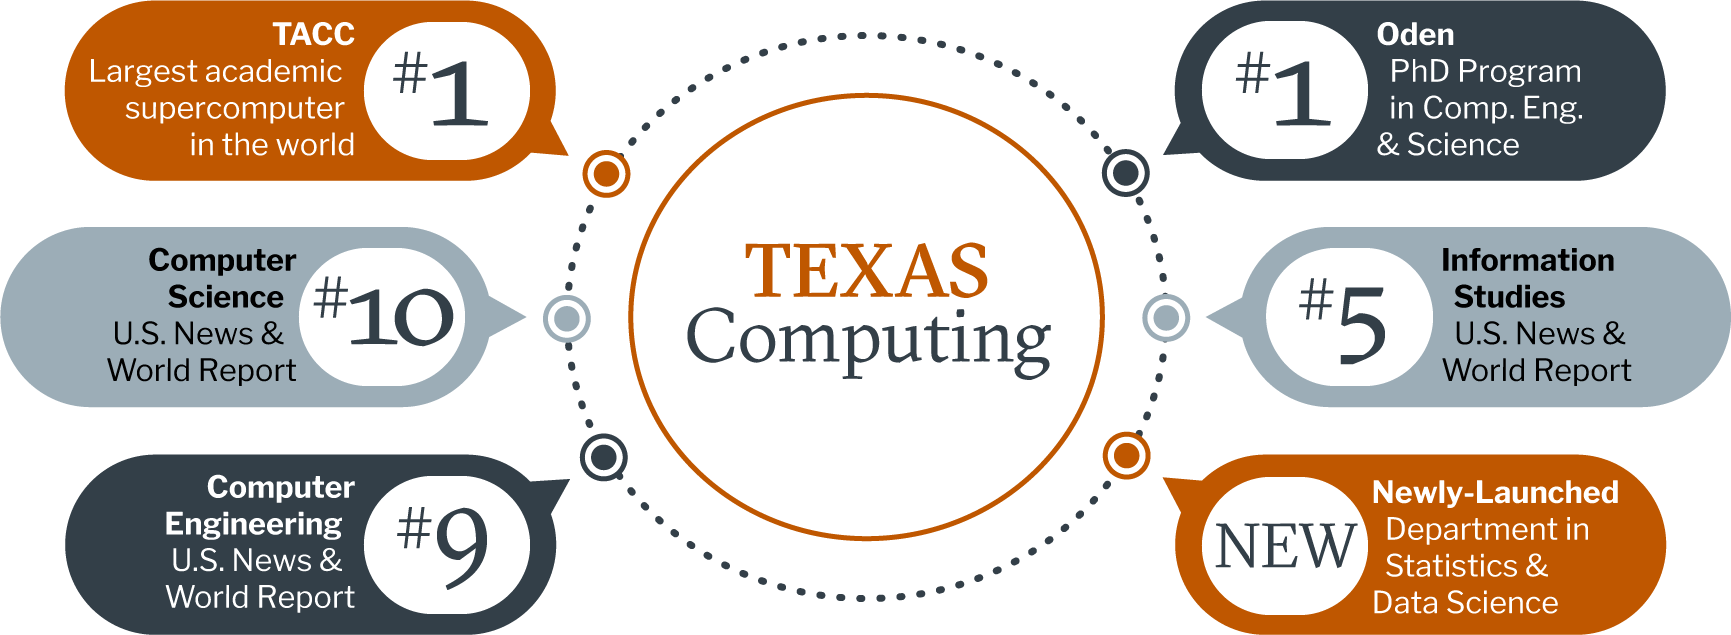 Texas Computing. TACC: largest academic supercomputer in the world. Computer Science: #8, U.S. News and World Report. Computer Engineering: #9, U.S. News and World Report. Oden: #1 PhD Program in Computational Engineering and Science. Information Studies: #5, U.S. News and World Report. NEW: Newly-Launched Department in Statistics and Data Science.